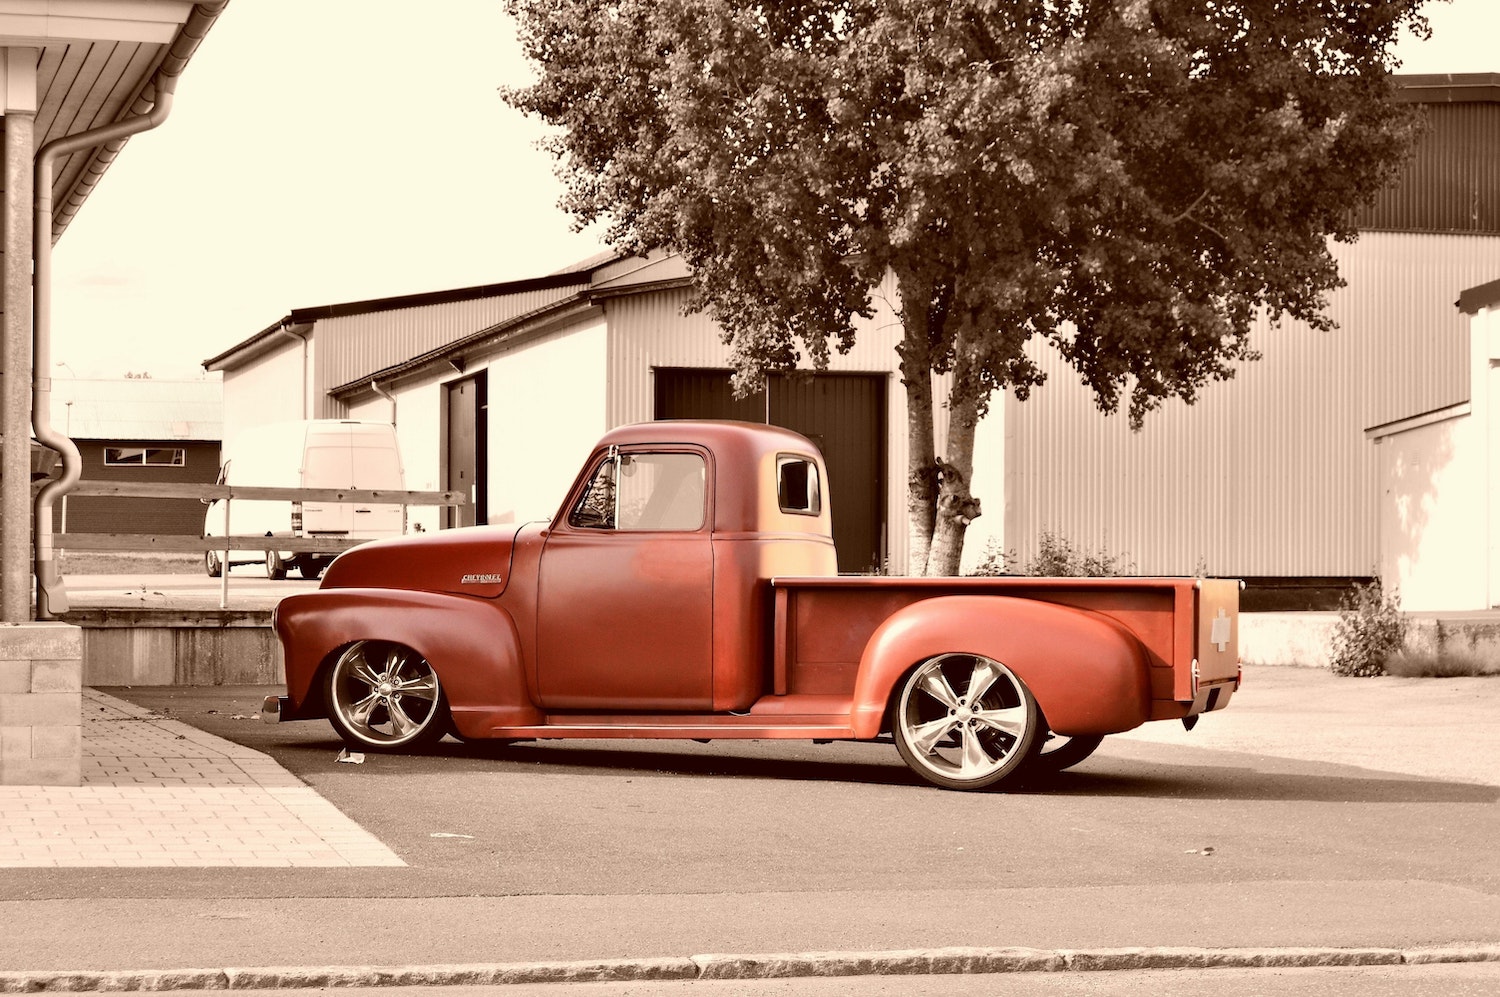 A classic red Chevrolet pickup truck parked in front of a tree, in a parking lot.